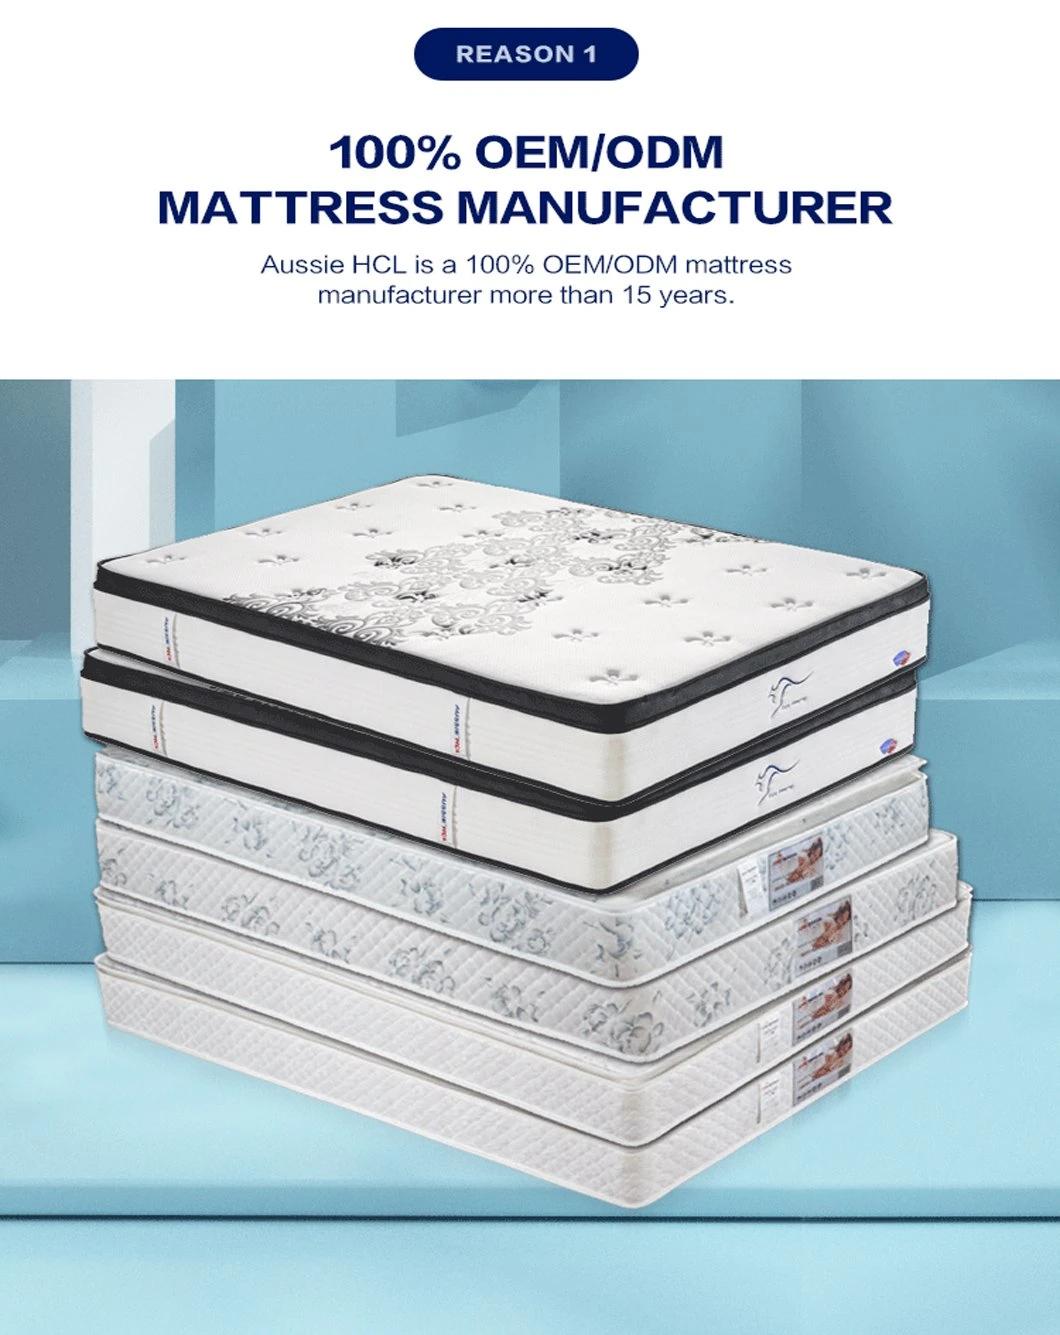 Factory Wholesale Quality Sleep Well King Queen Double Size Memory Gel Foam Innerspring Pocket Coil Mattress in a Box